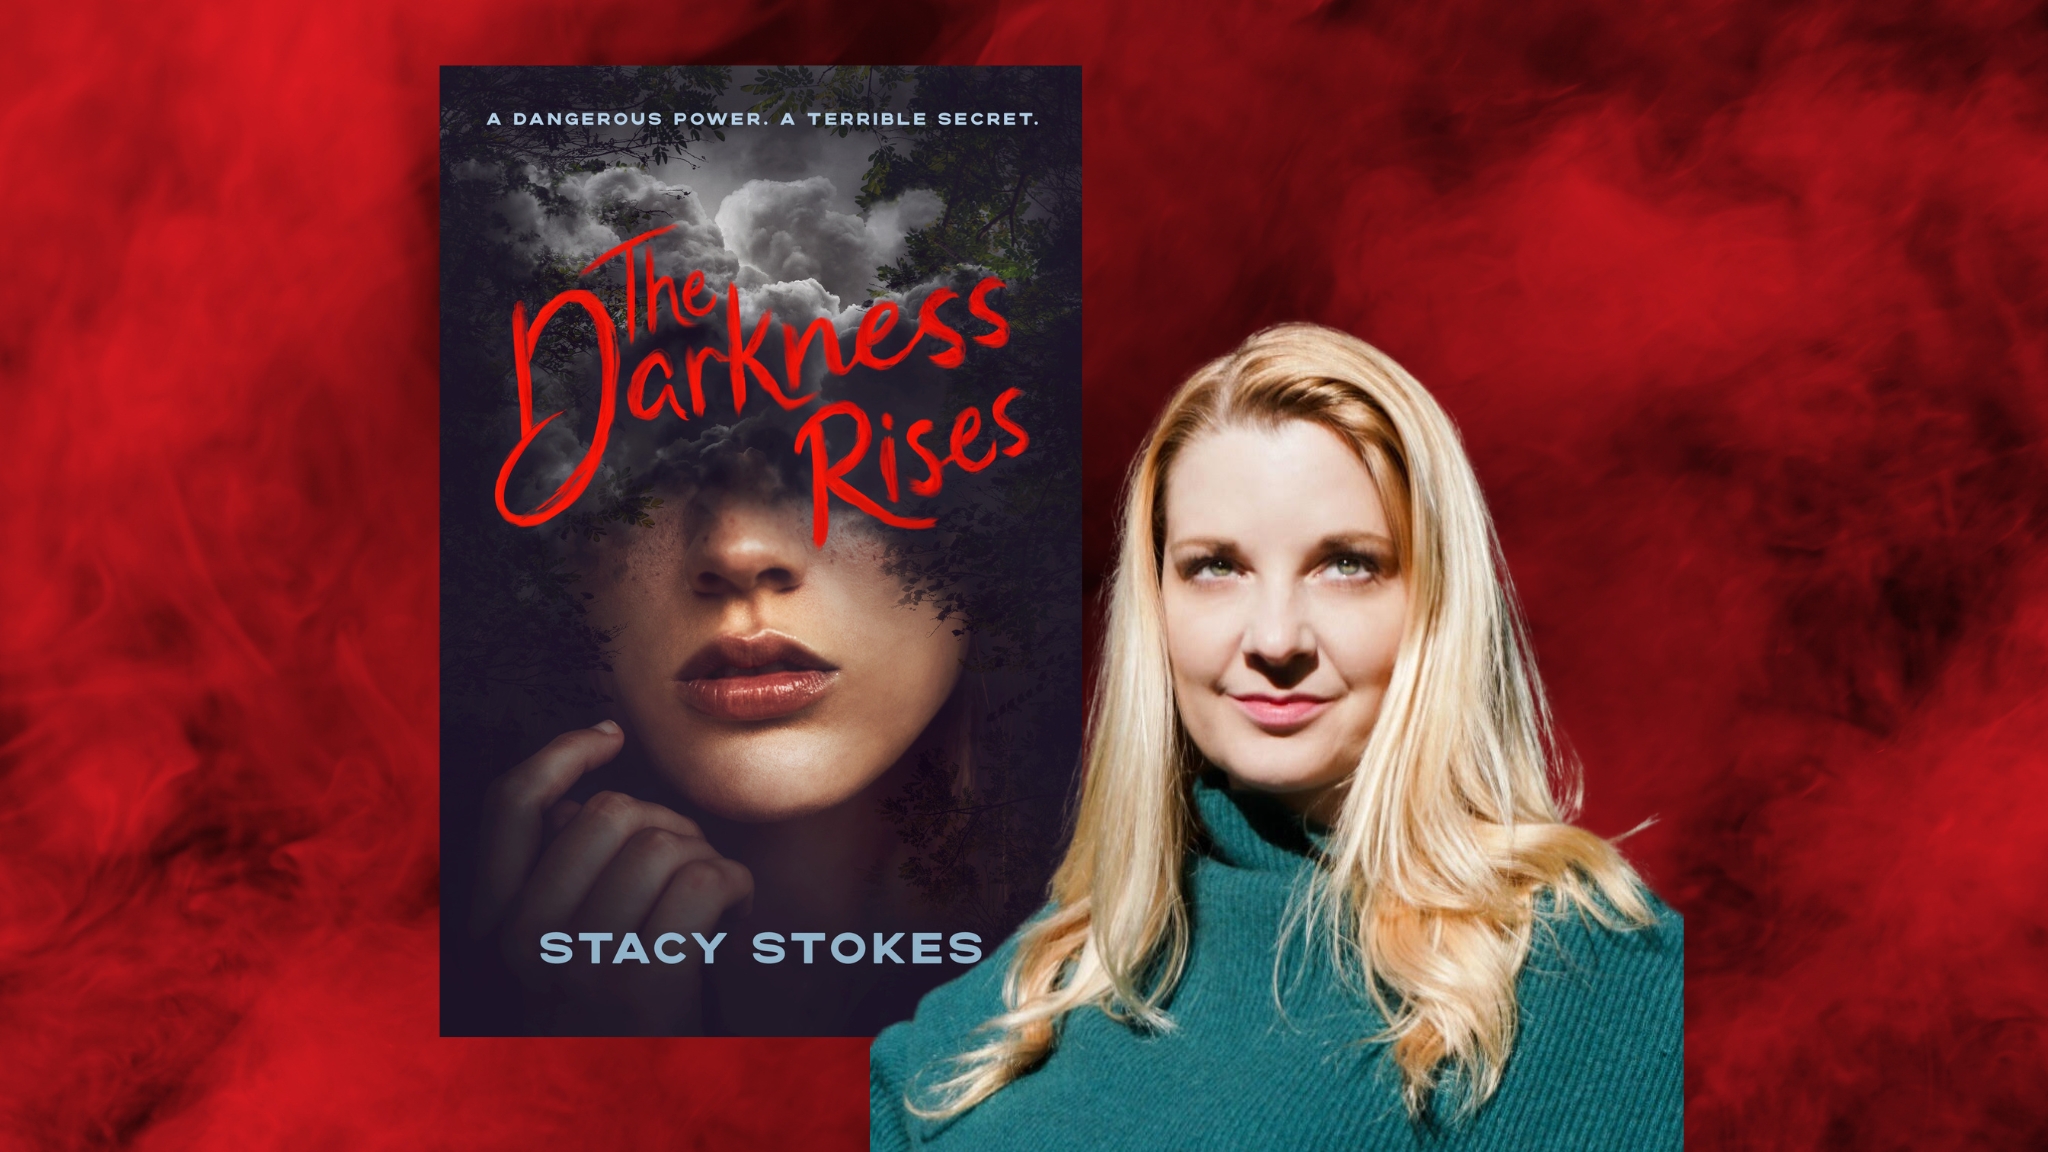 Stacy Stokes The Darkness Rises